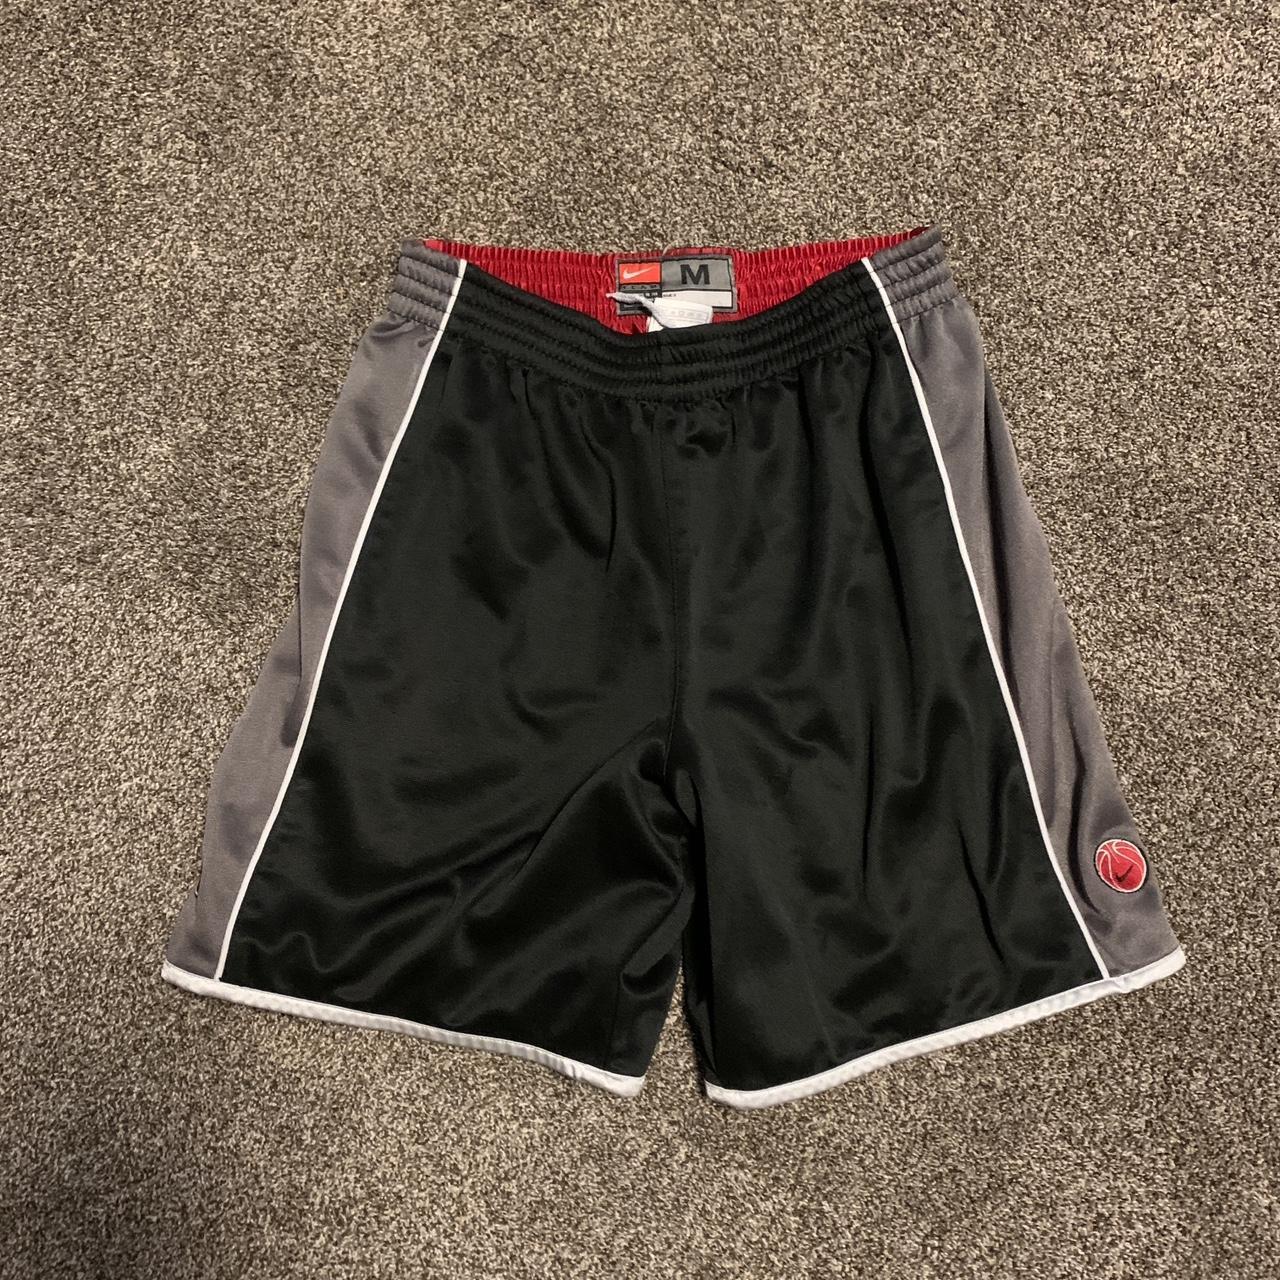 Reebok Iverson basketball shorts in red